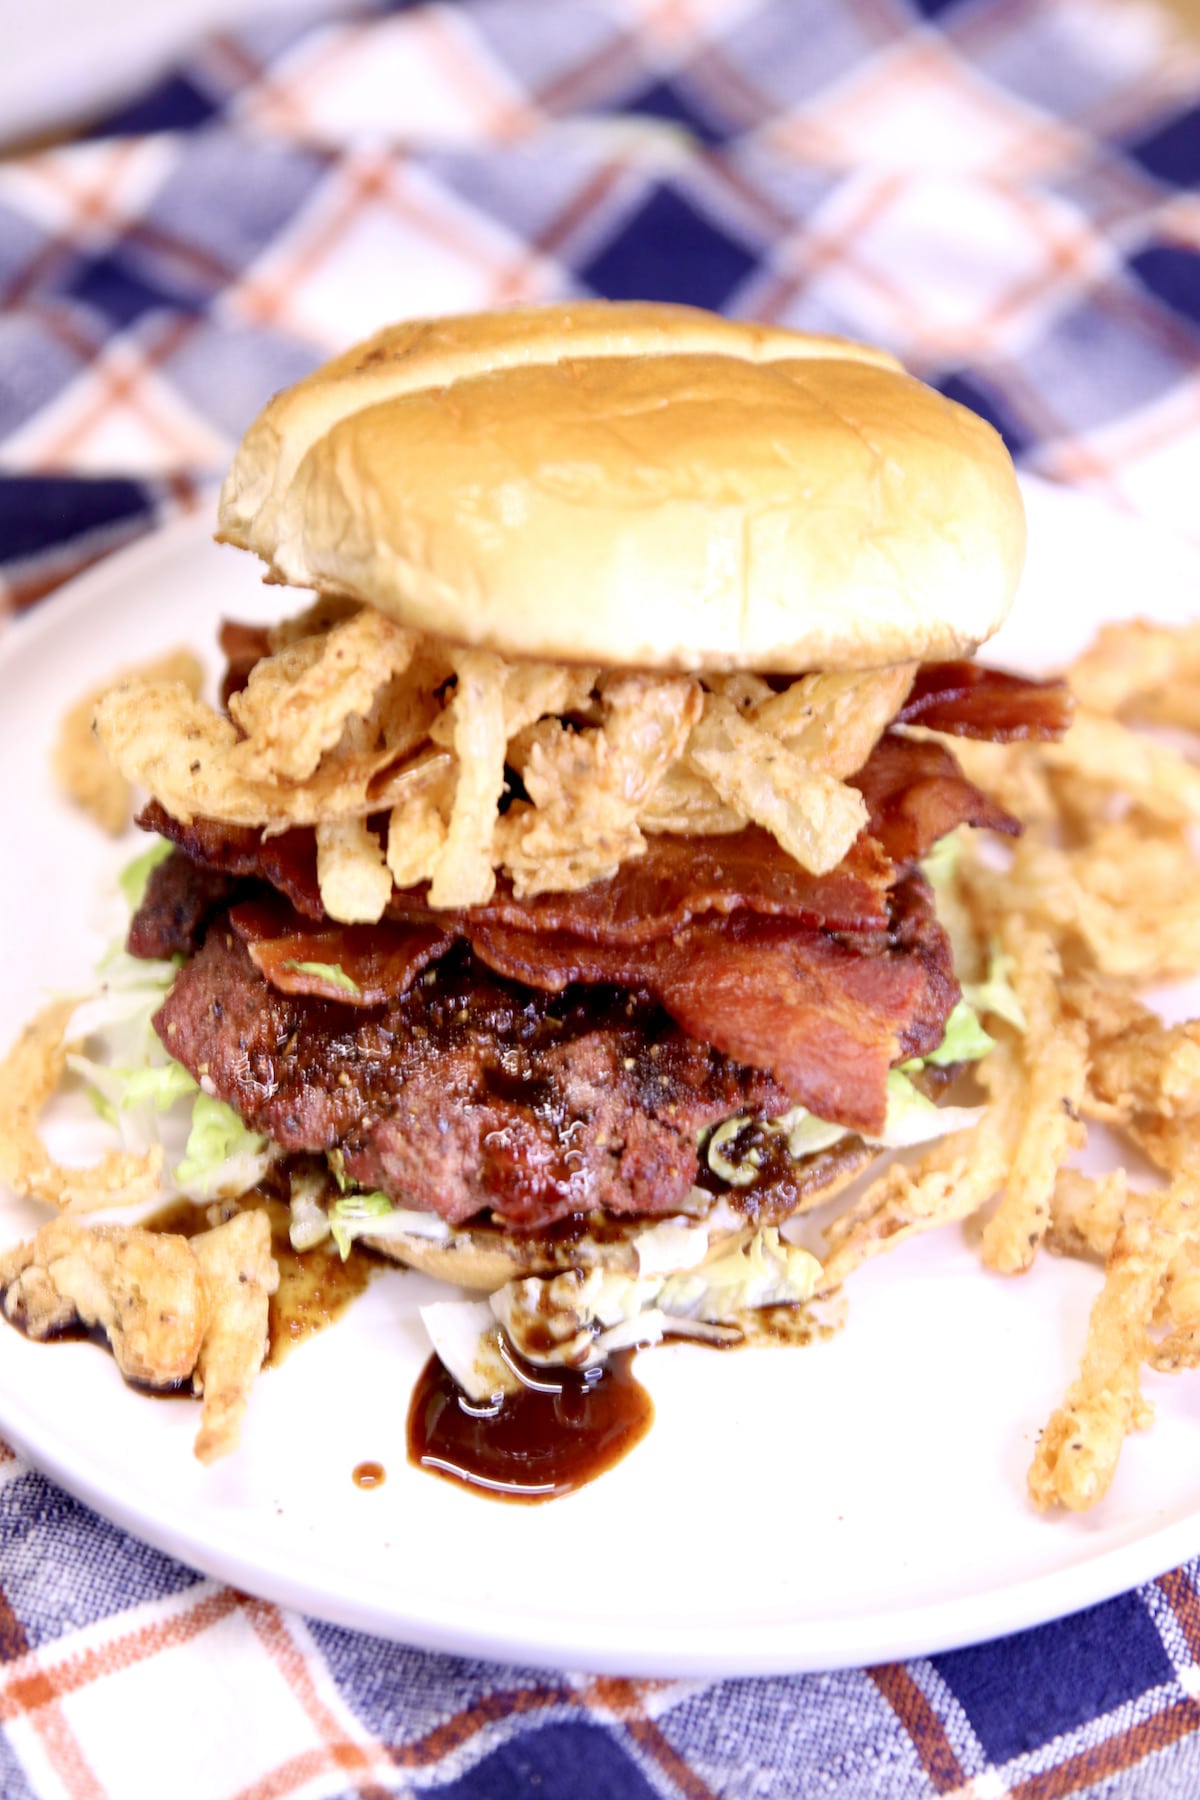 Steakhouse burger with bacon and onion strings.